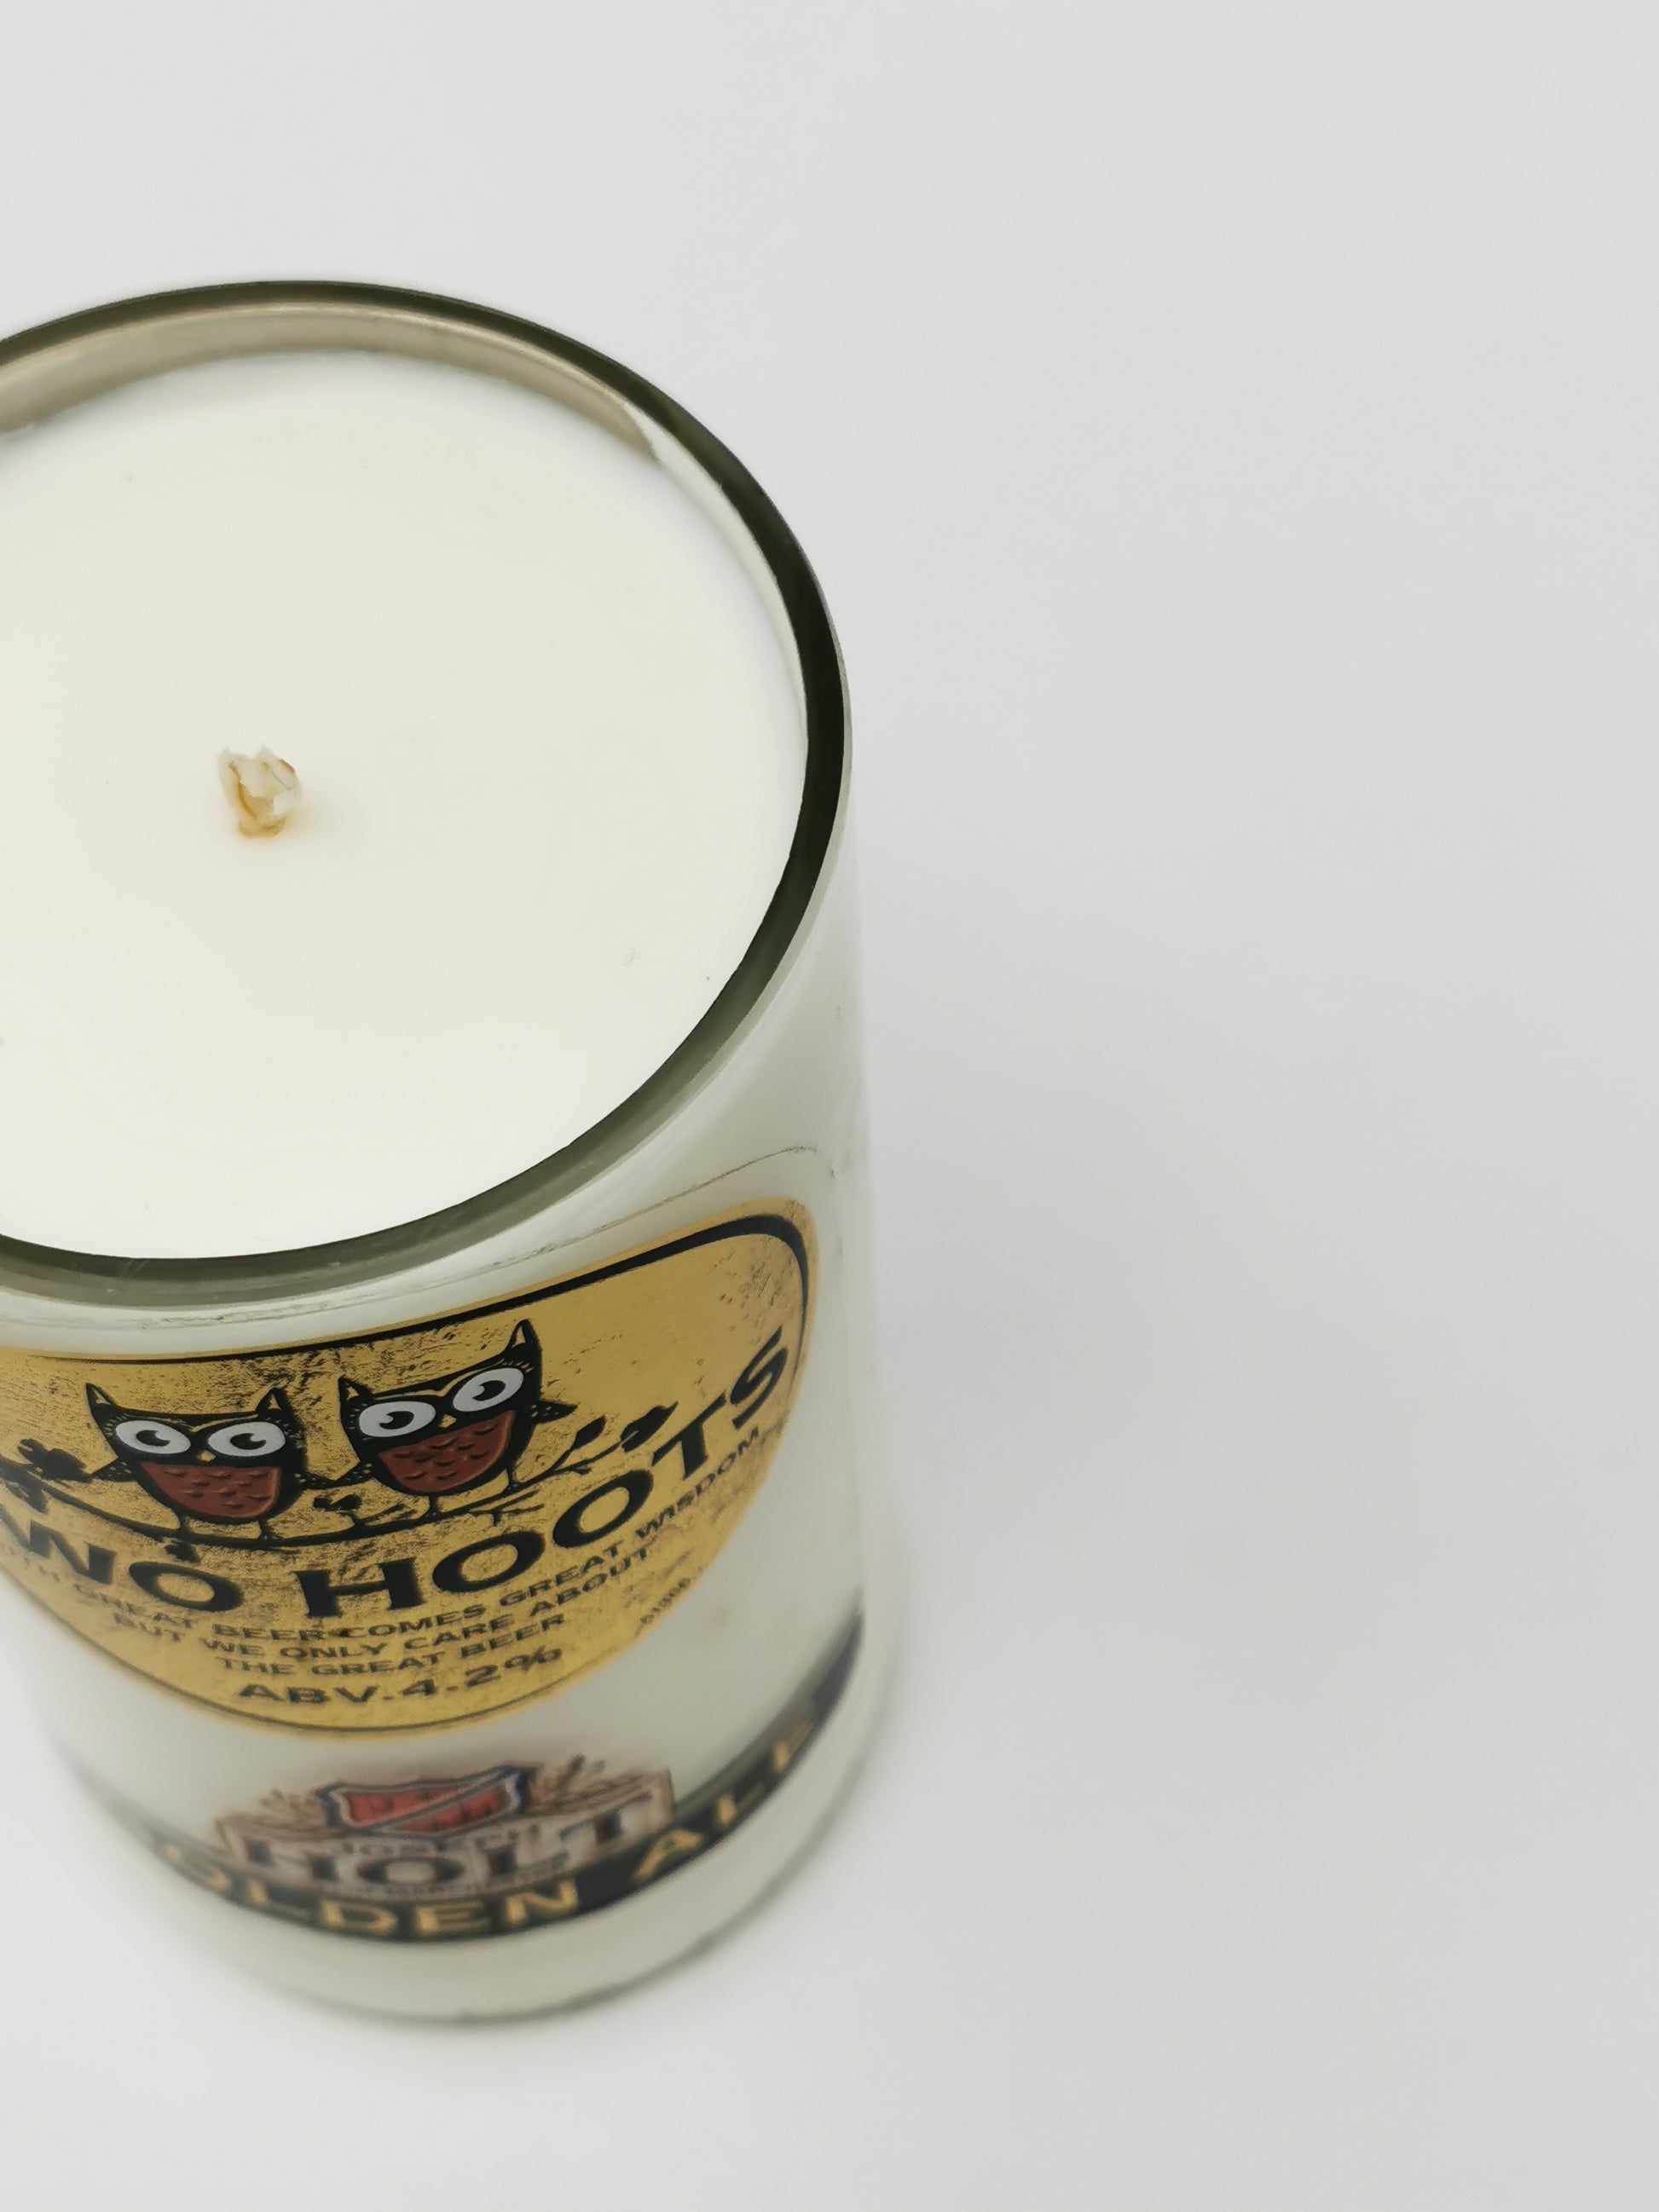 Eco Friendly-Two Hoots Golden Ale Beer Bottle Candle-Beer & Ale Bottle Candles-Adhock Homeware